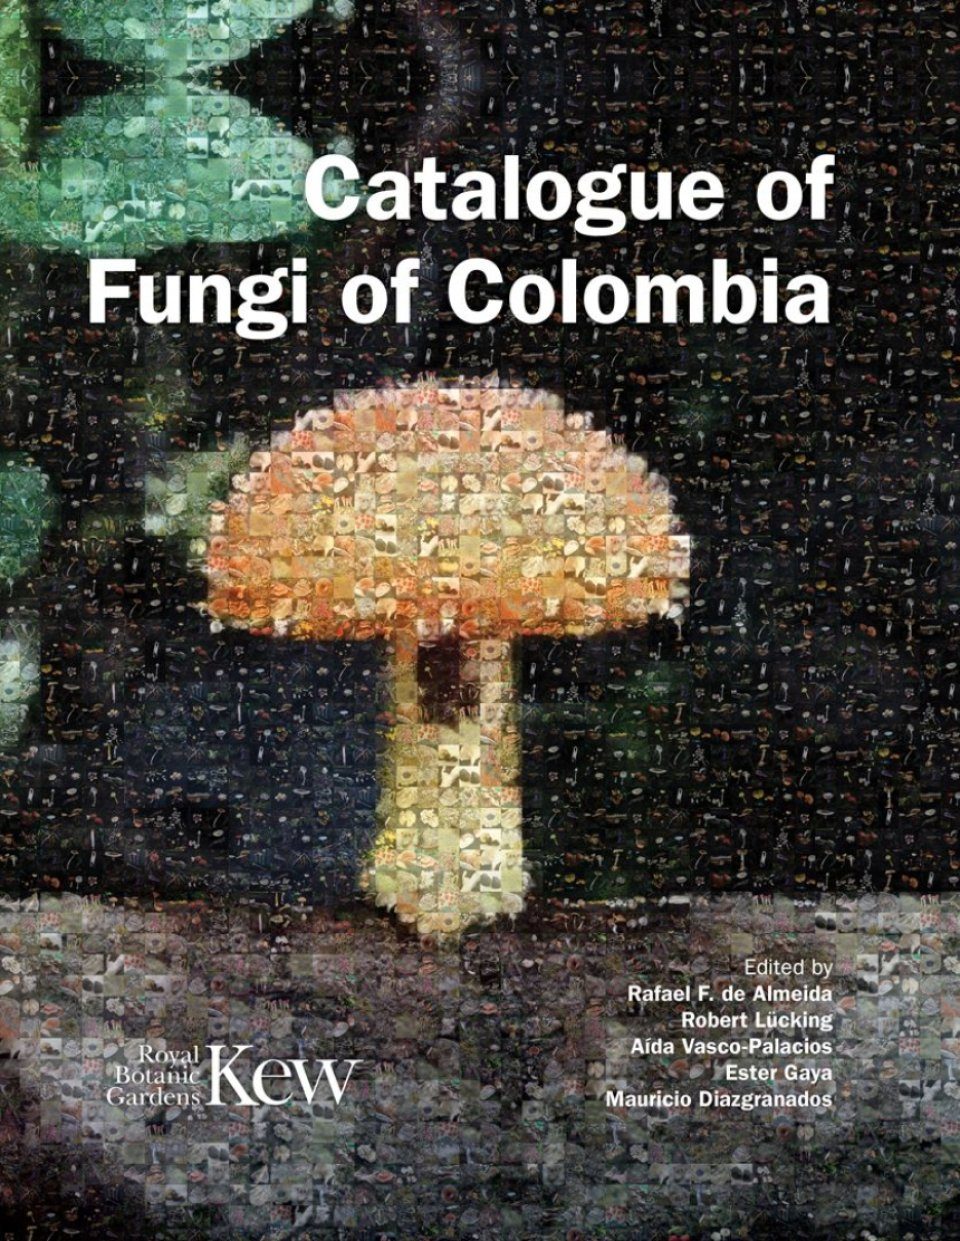 Catalogue of Fungi of Colombia | NHBS Academic & Professional Books